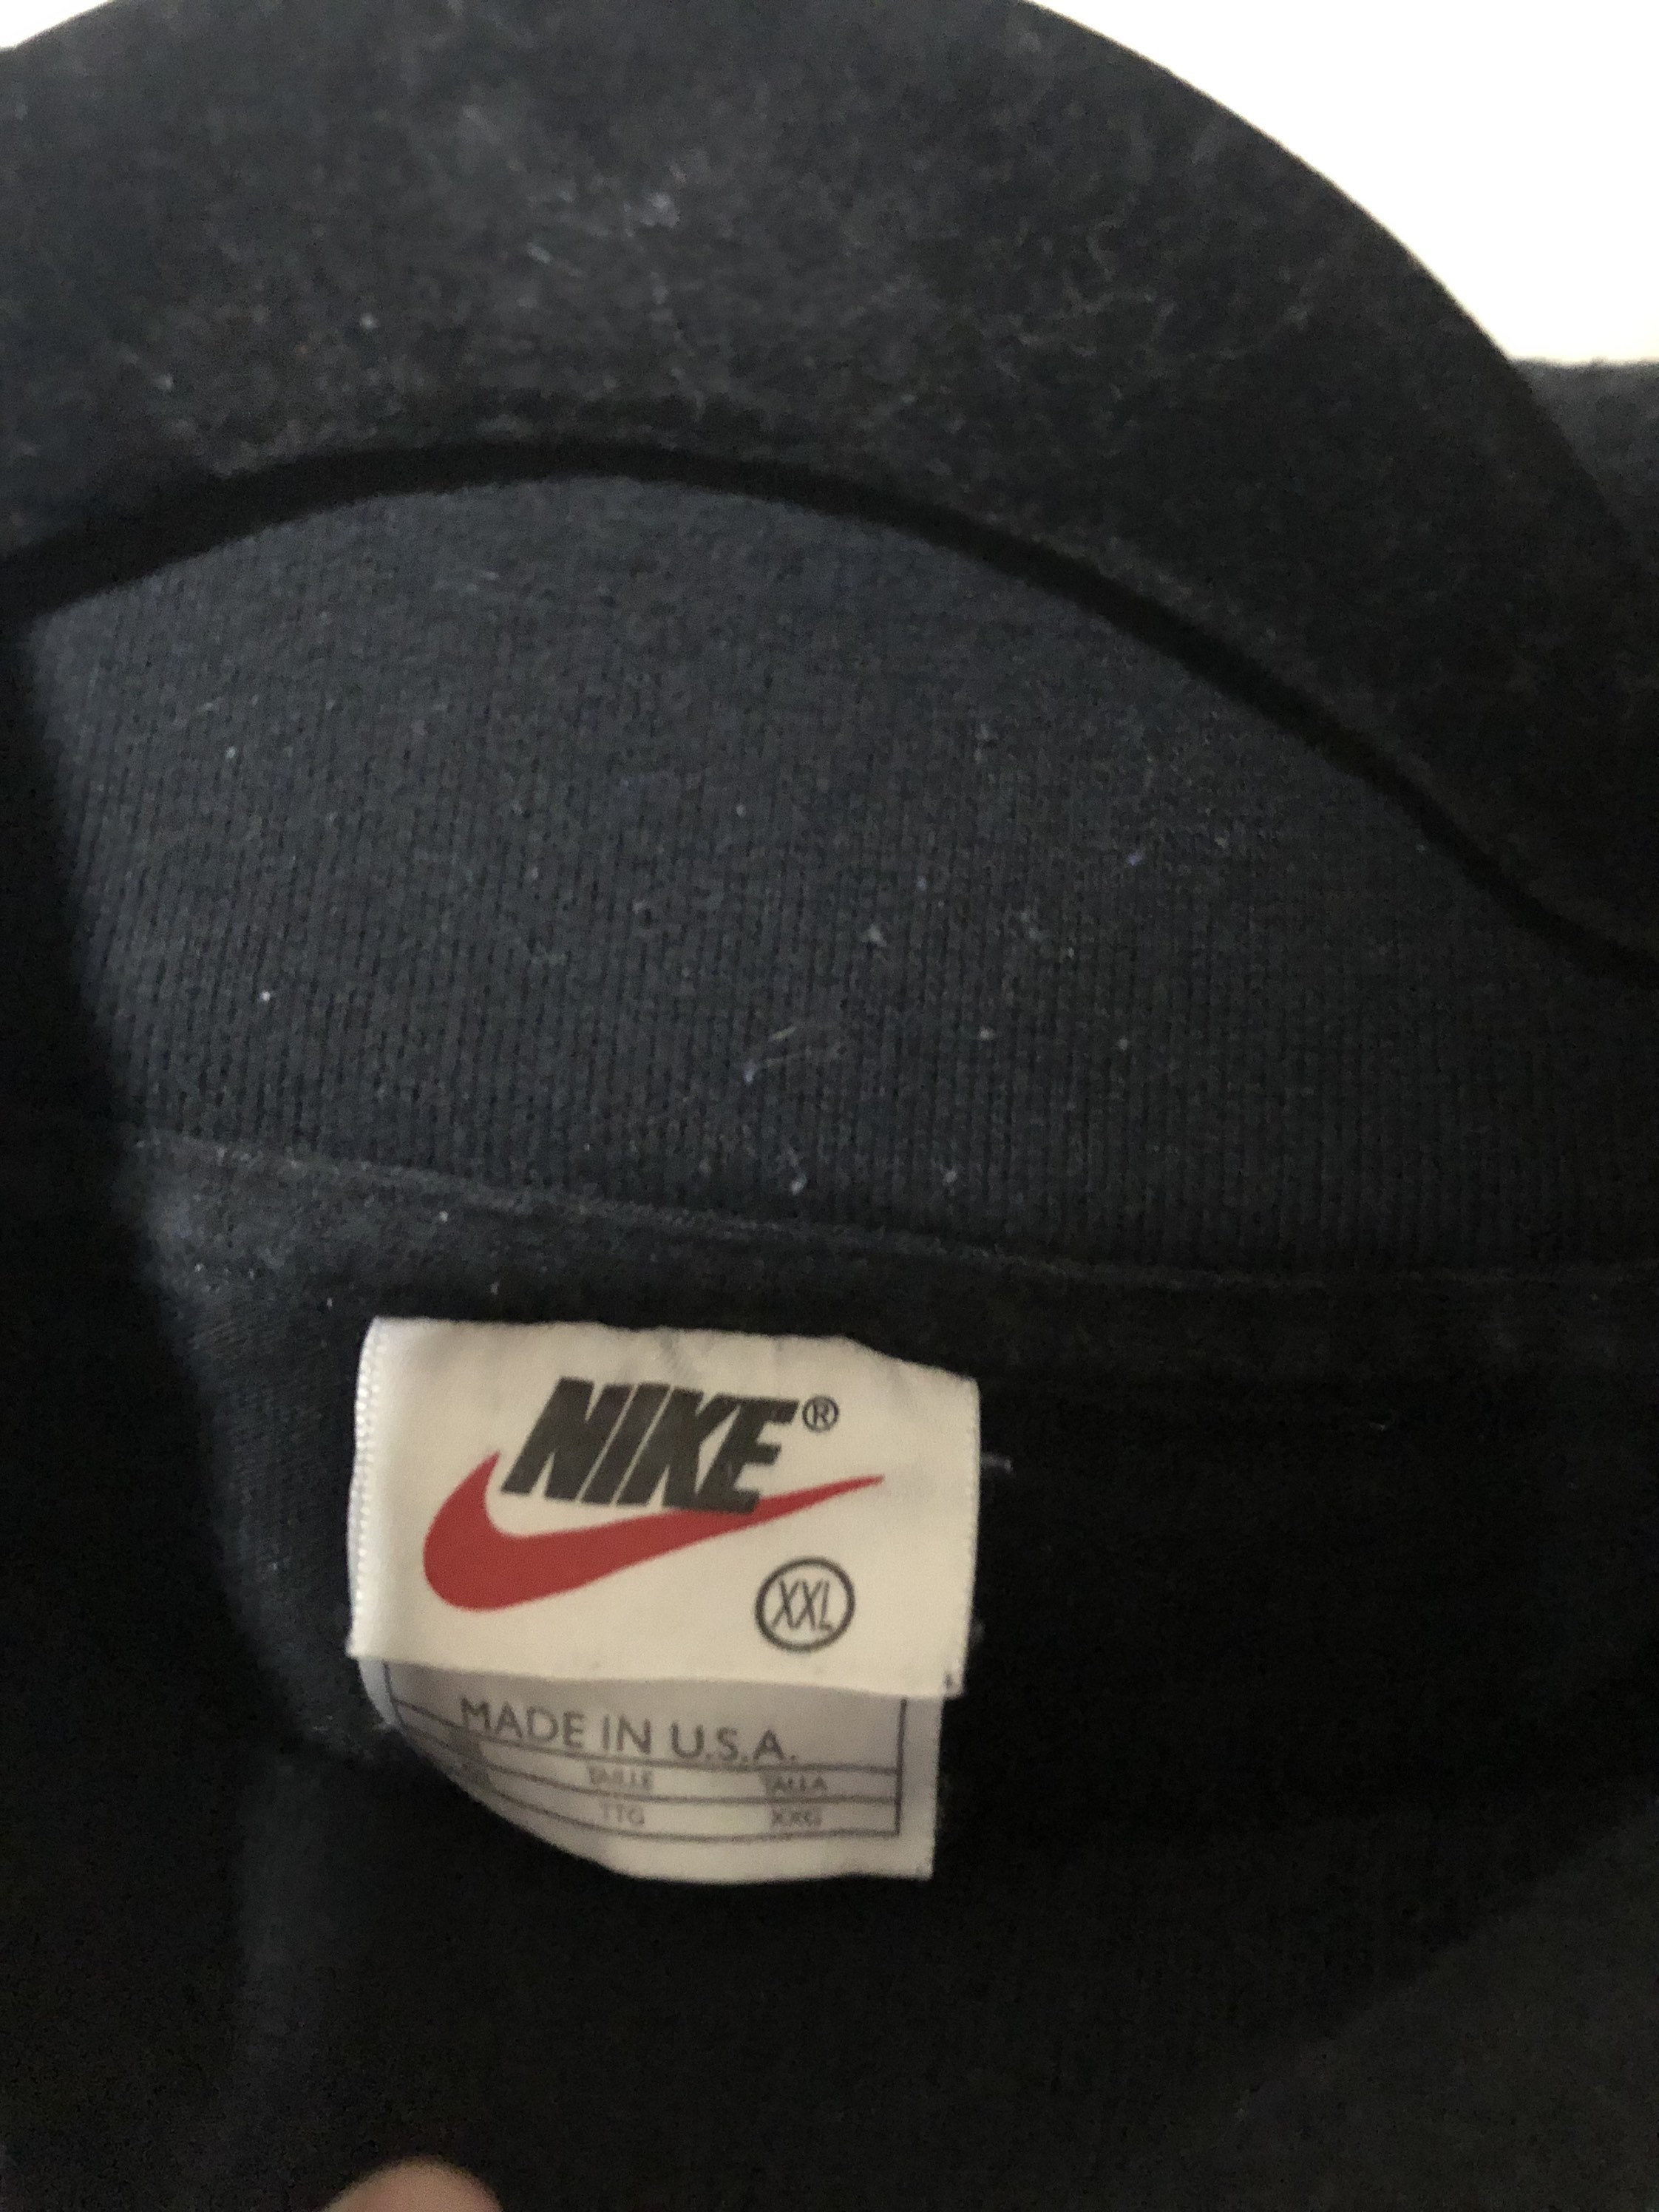 UNKNWN's New Vintage Nike T-Shirt Drop Is the Perfect Cap on the